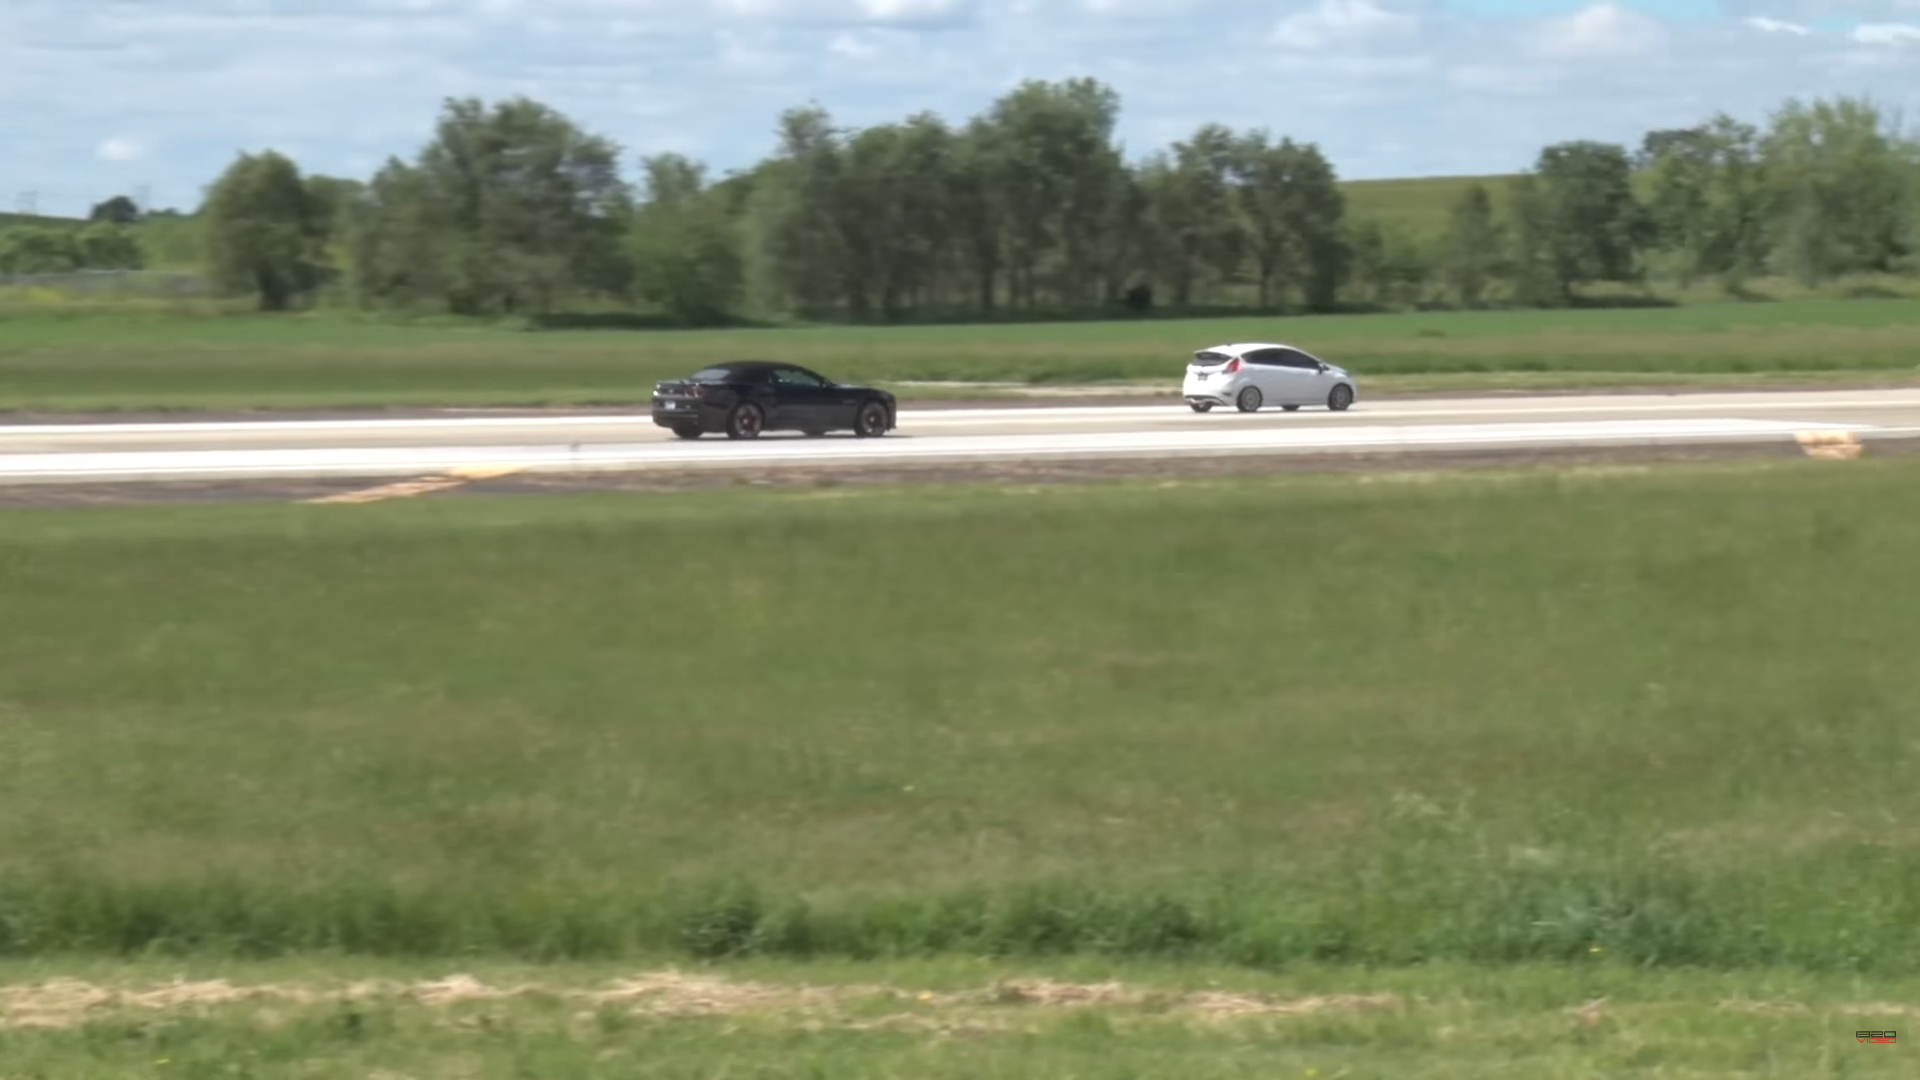 Watch a Fiesta ST Smoke a Camaro, Supra, and Others at a Drag Strip